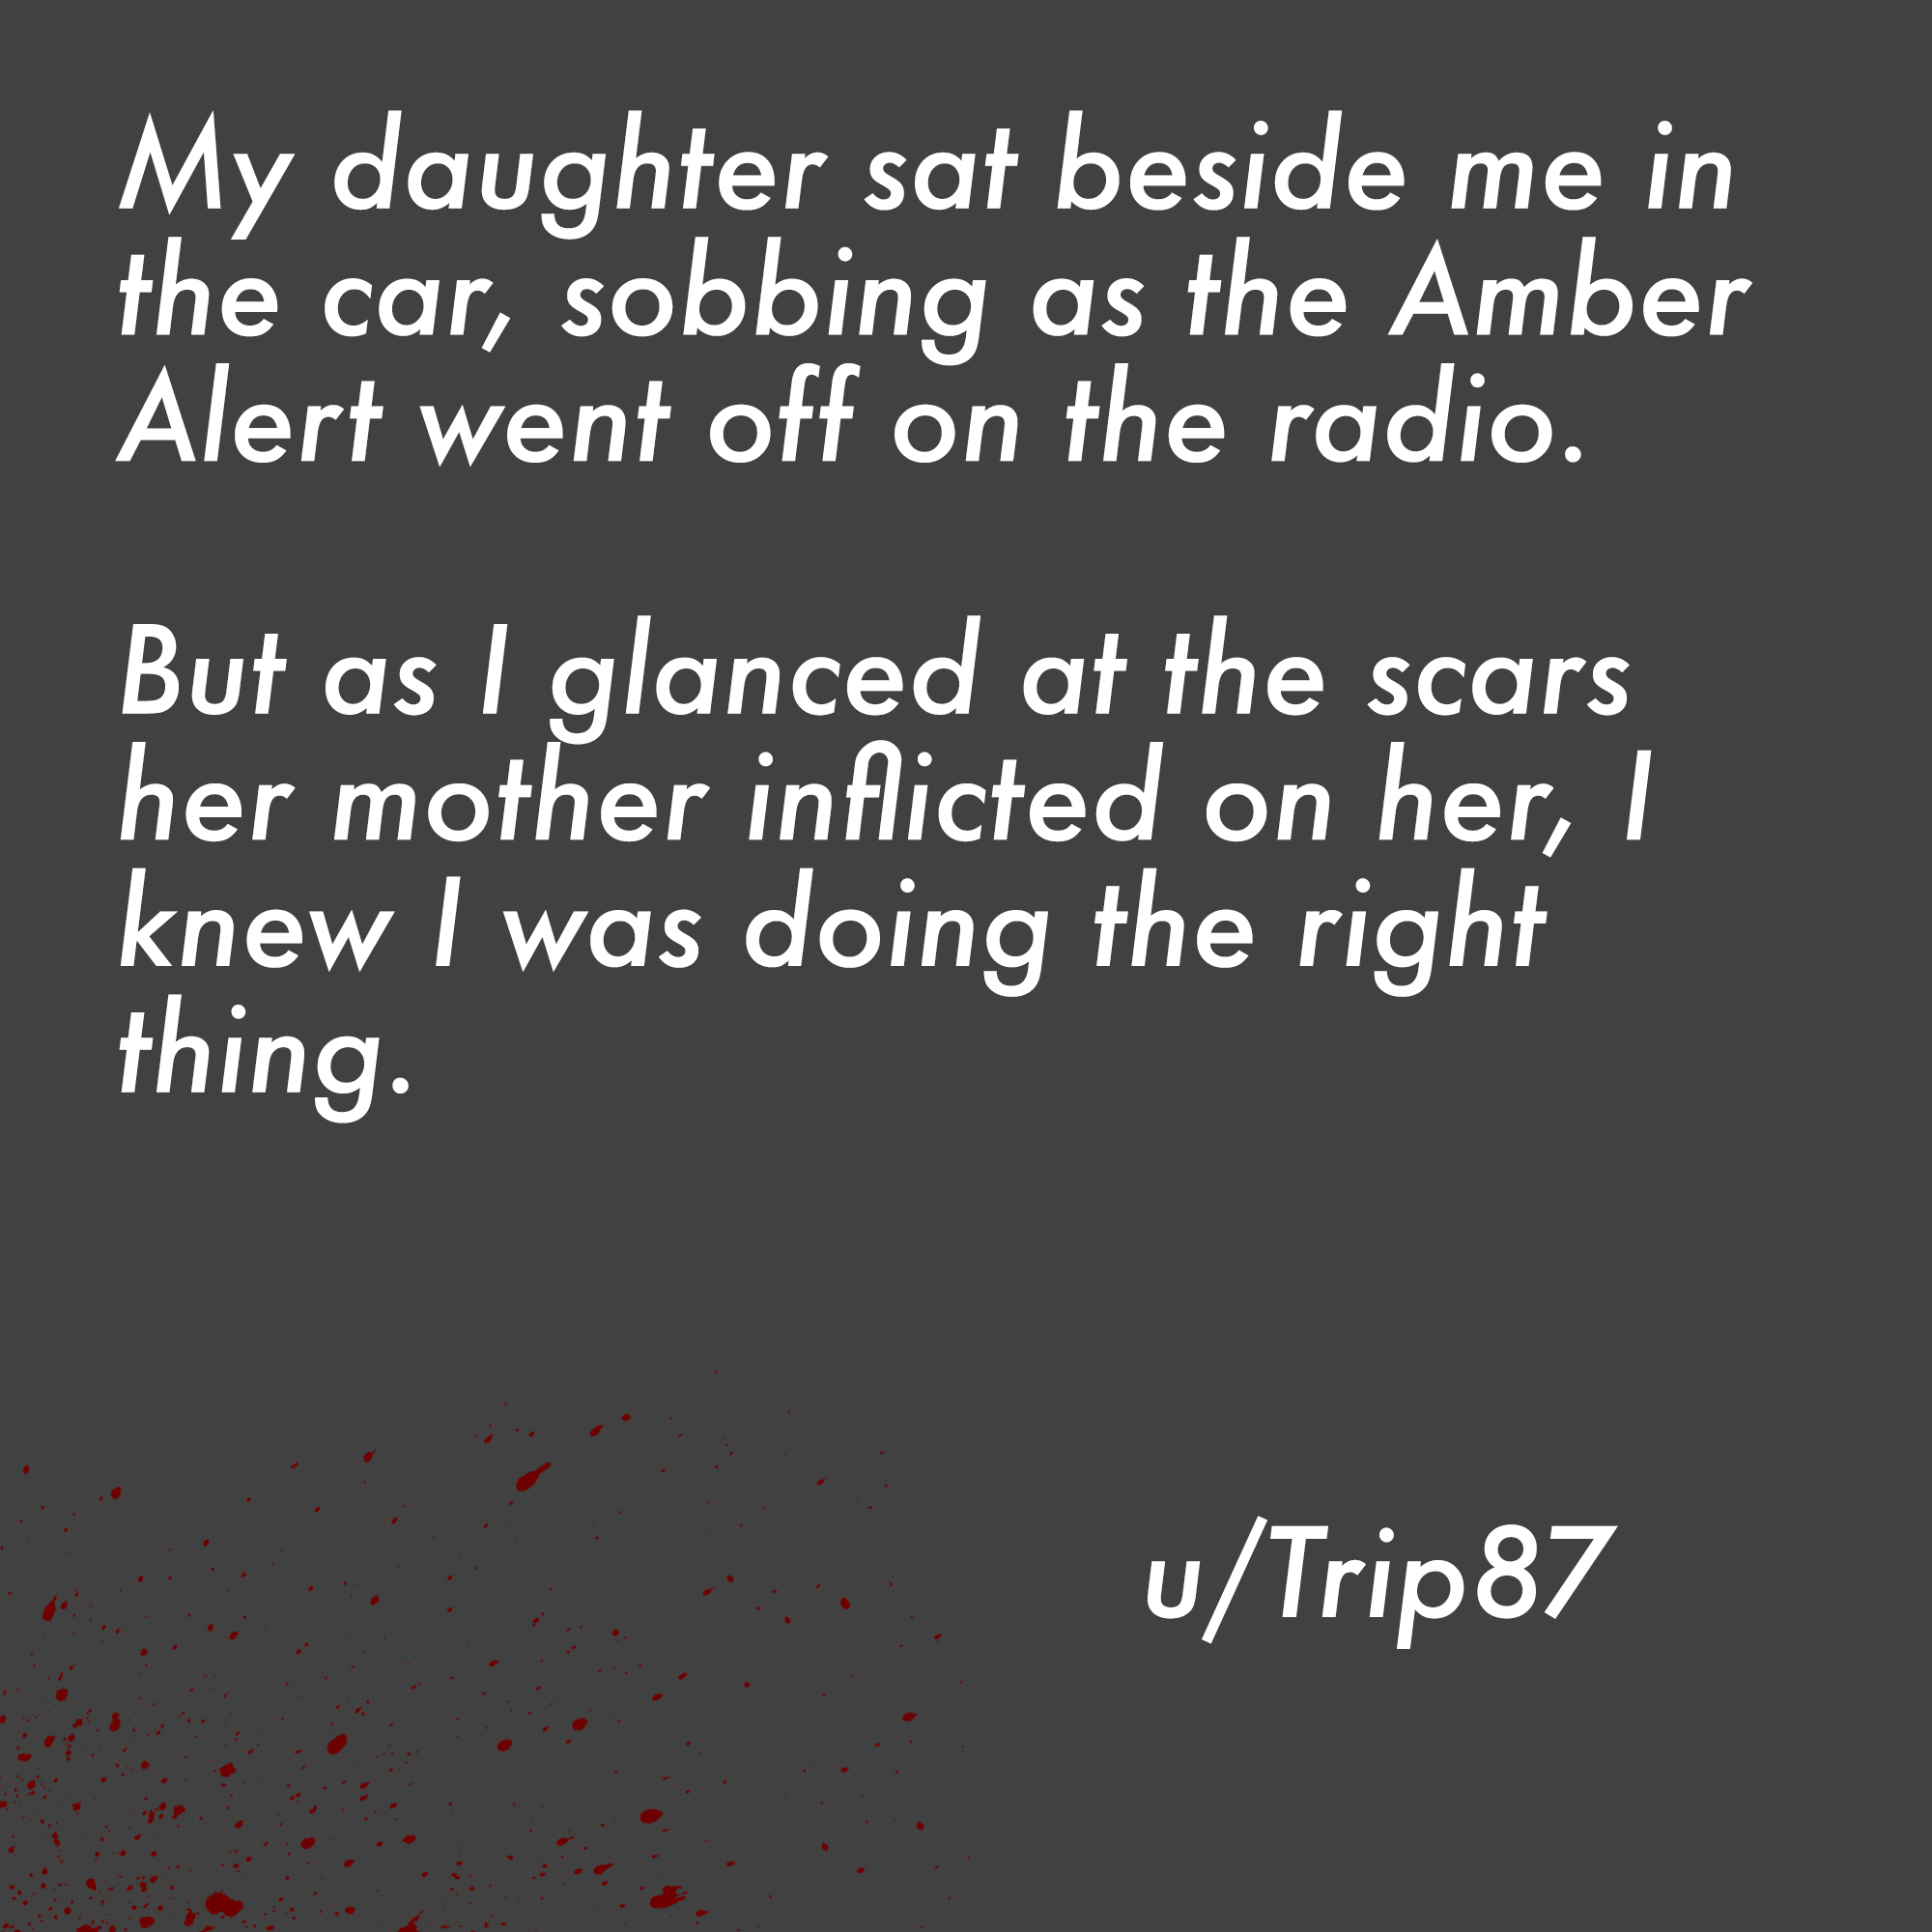 two line horror stories - abel tesfaye - My daughter sat beside me in the car, sobbing as the Amber Alert went off on the radio. But as I glanced at the scars her mother inflicted on her, I knew I was doing the right thing. uTrip 87